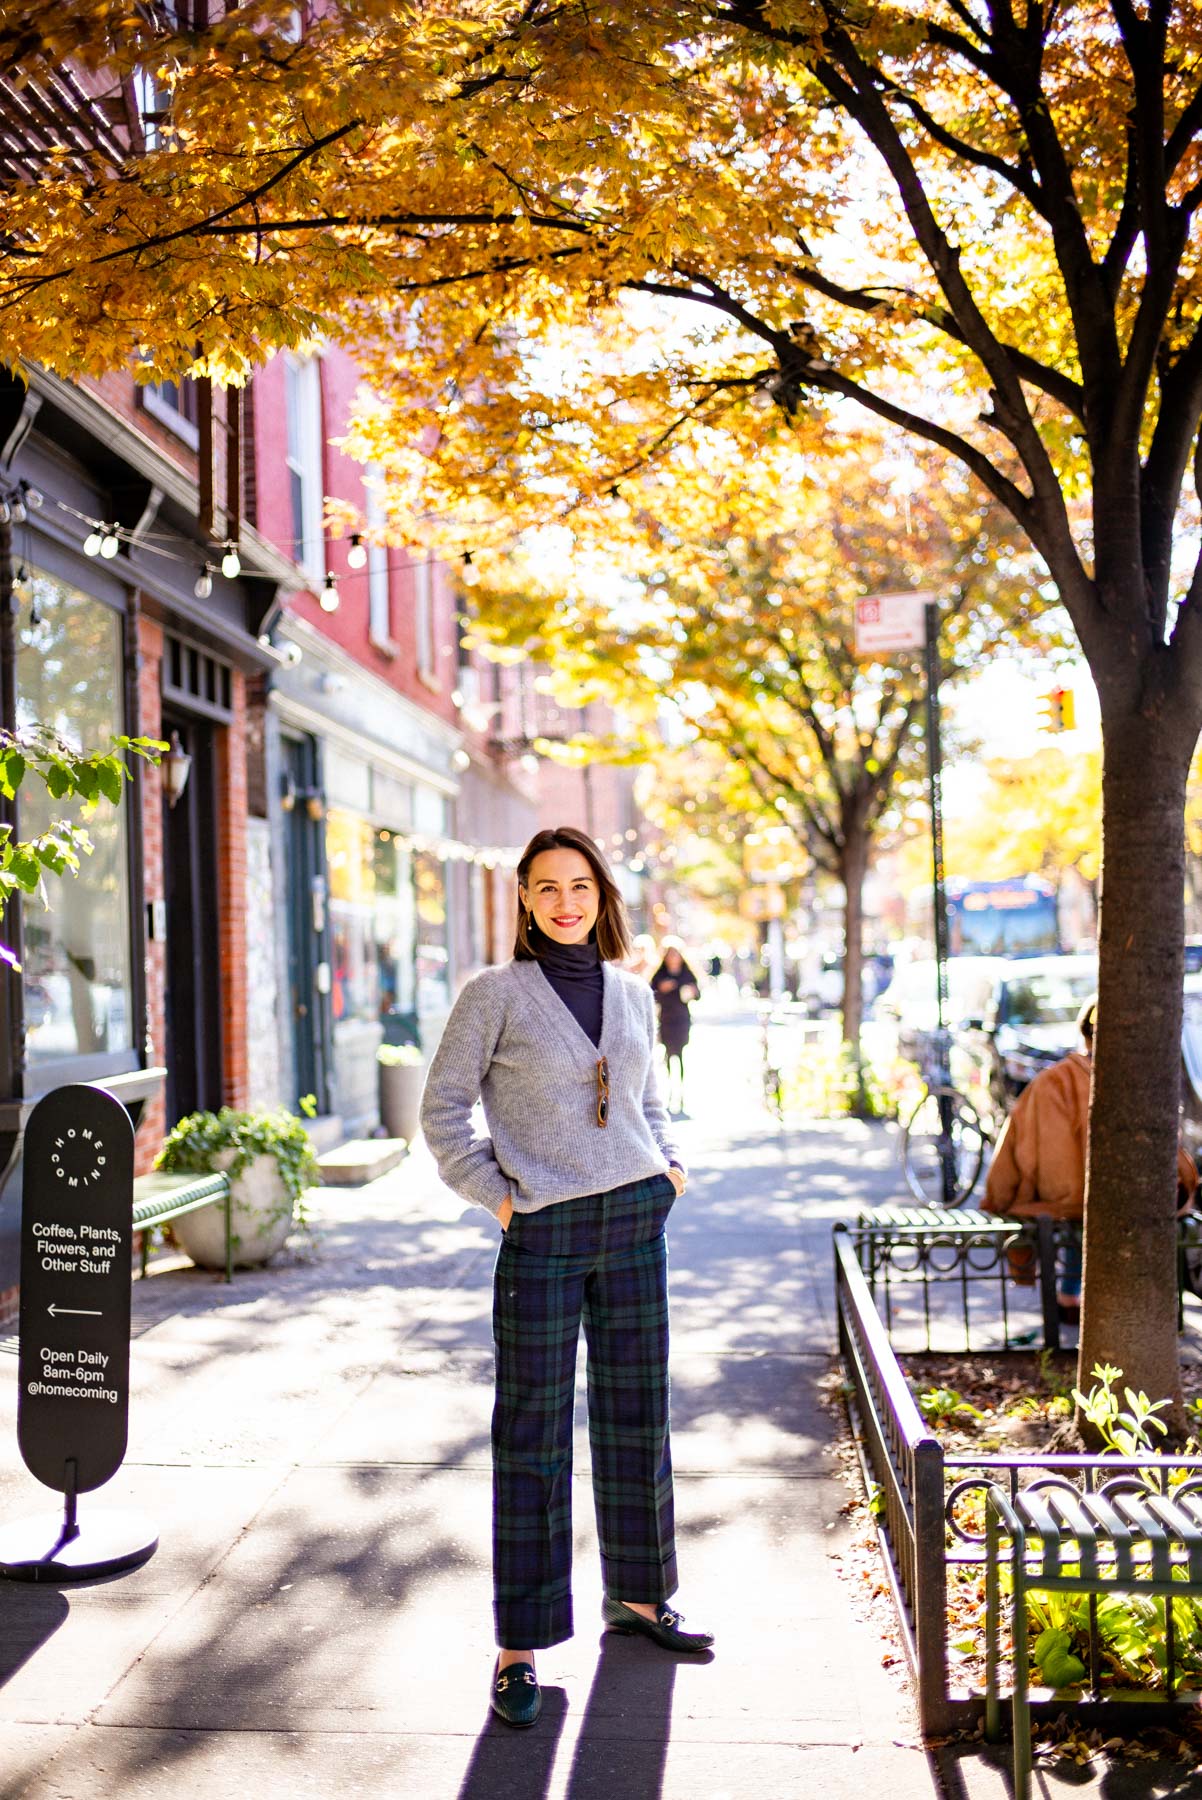 Fashionable woman in a gray sweater and plaid green and blue pants standing under a sun-soaked tree in Greenpoint Brooklyn, one of the best Brooklyn neighborhoods